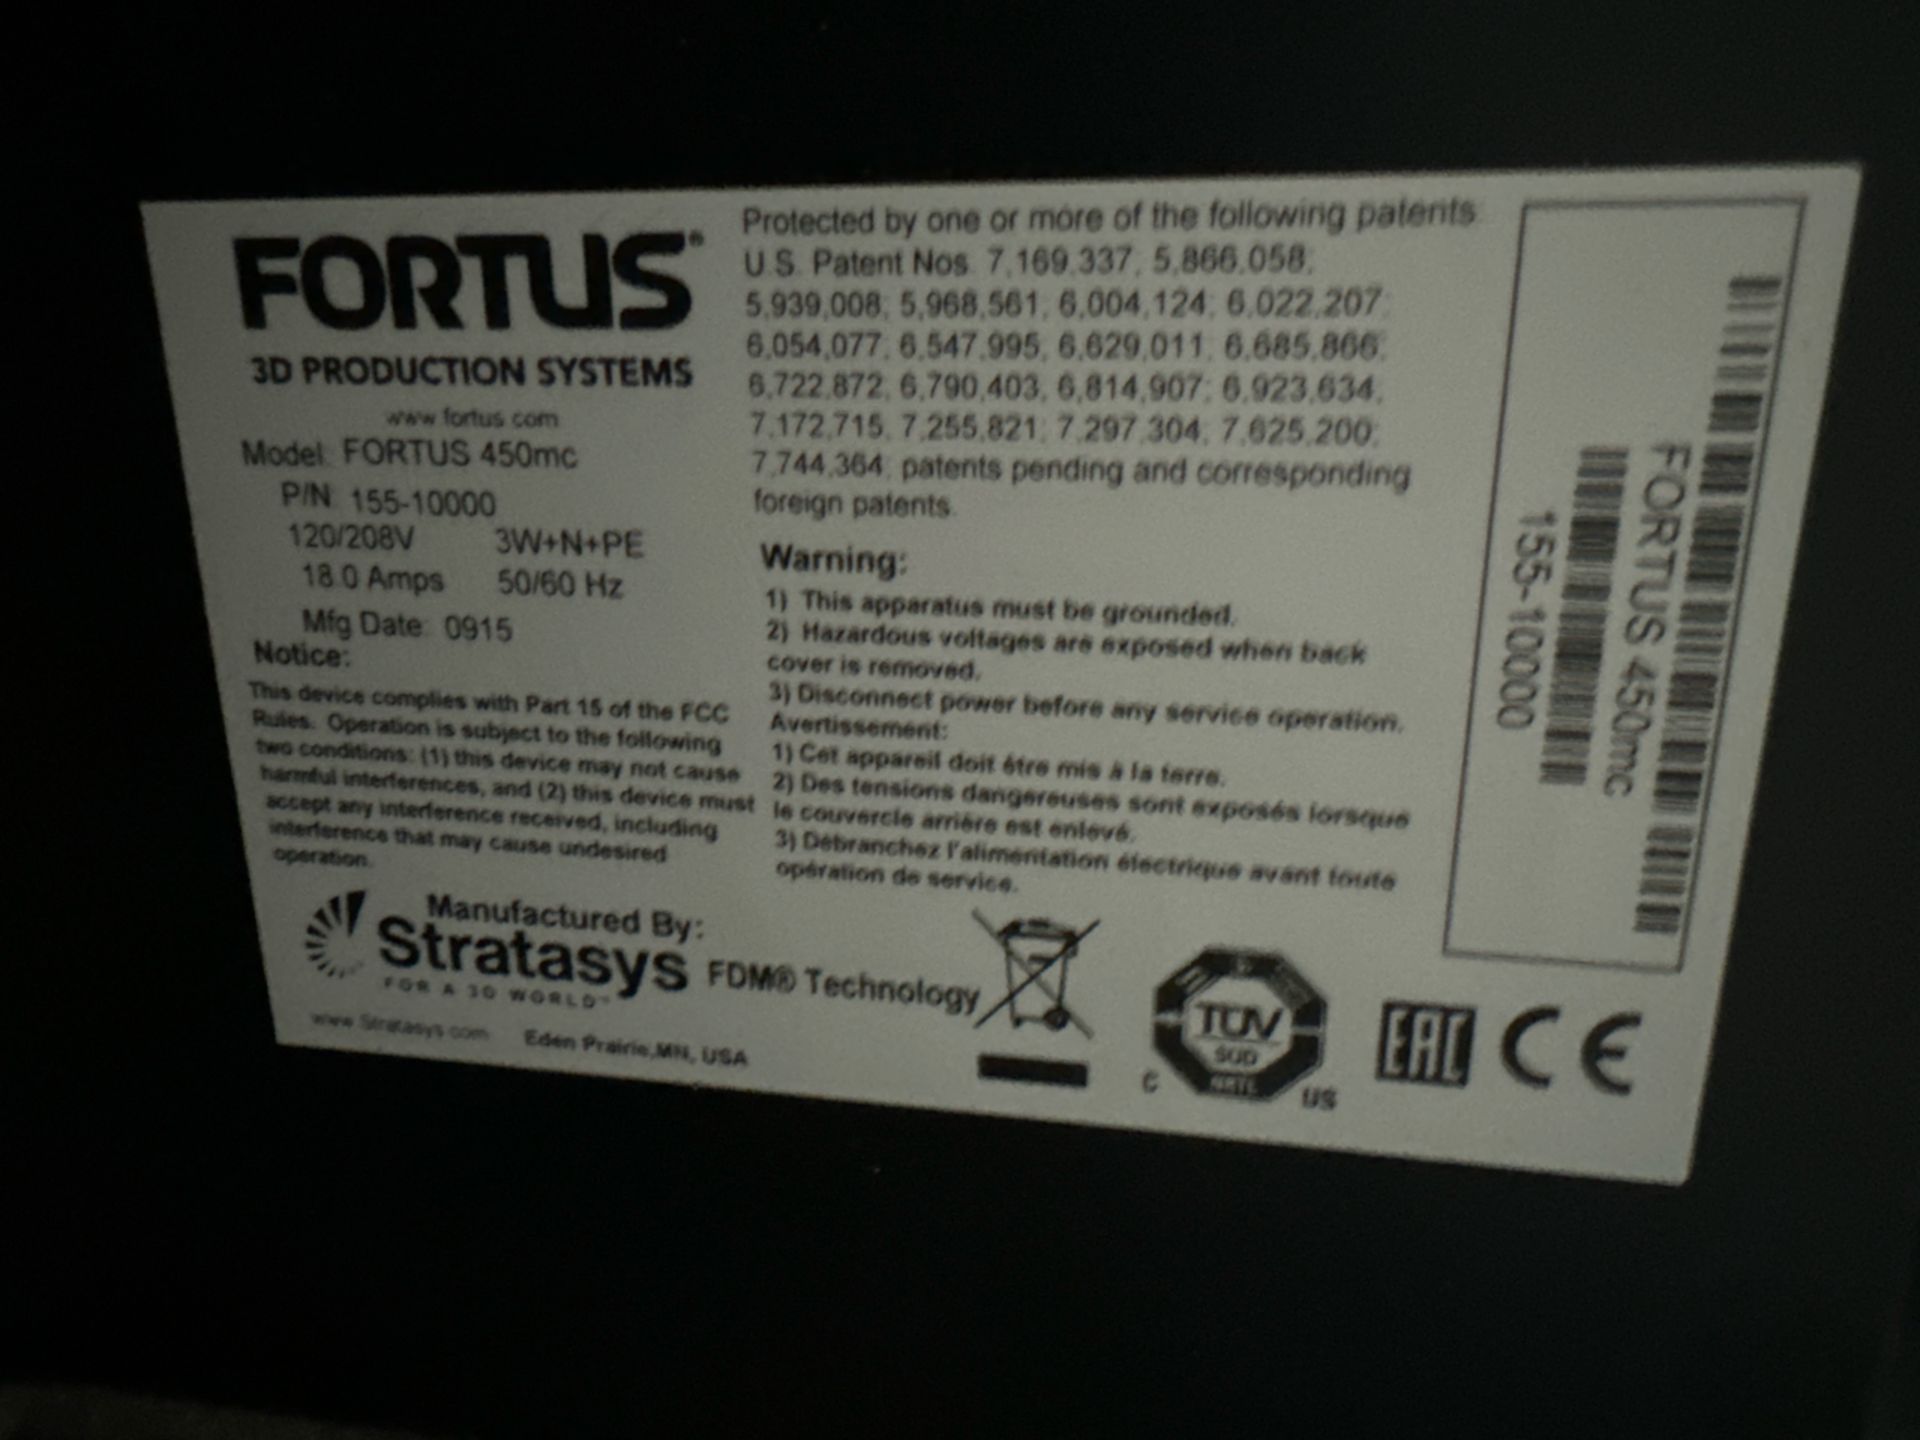 Stratasys Fortus 450mc 3D Production System Printer w/ Contents of Utility Cabinet - Image 5 of 17